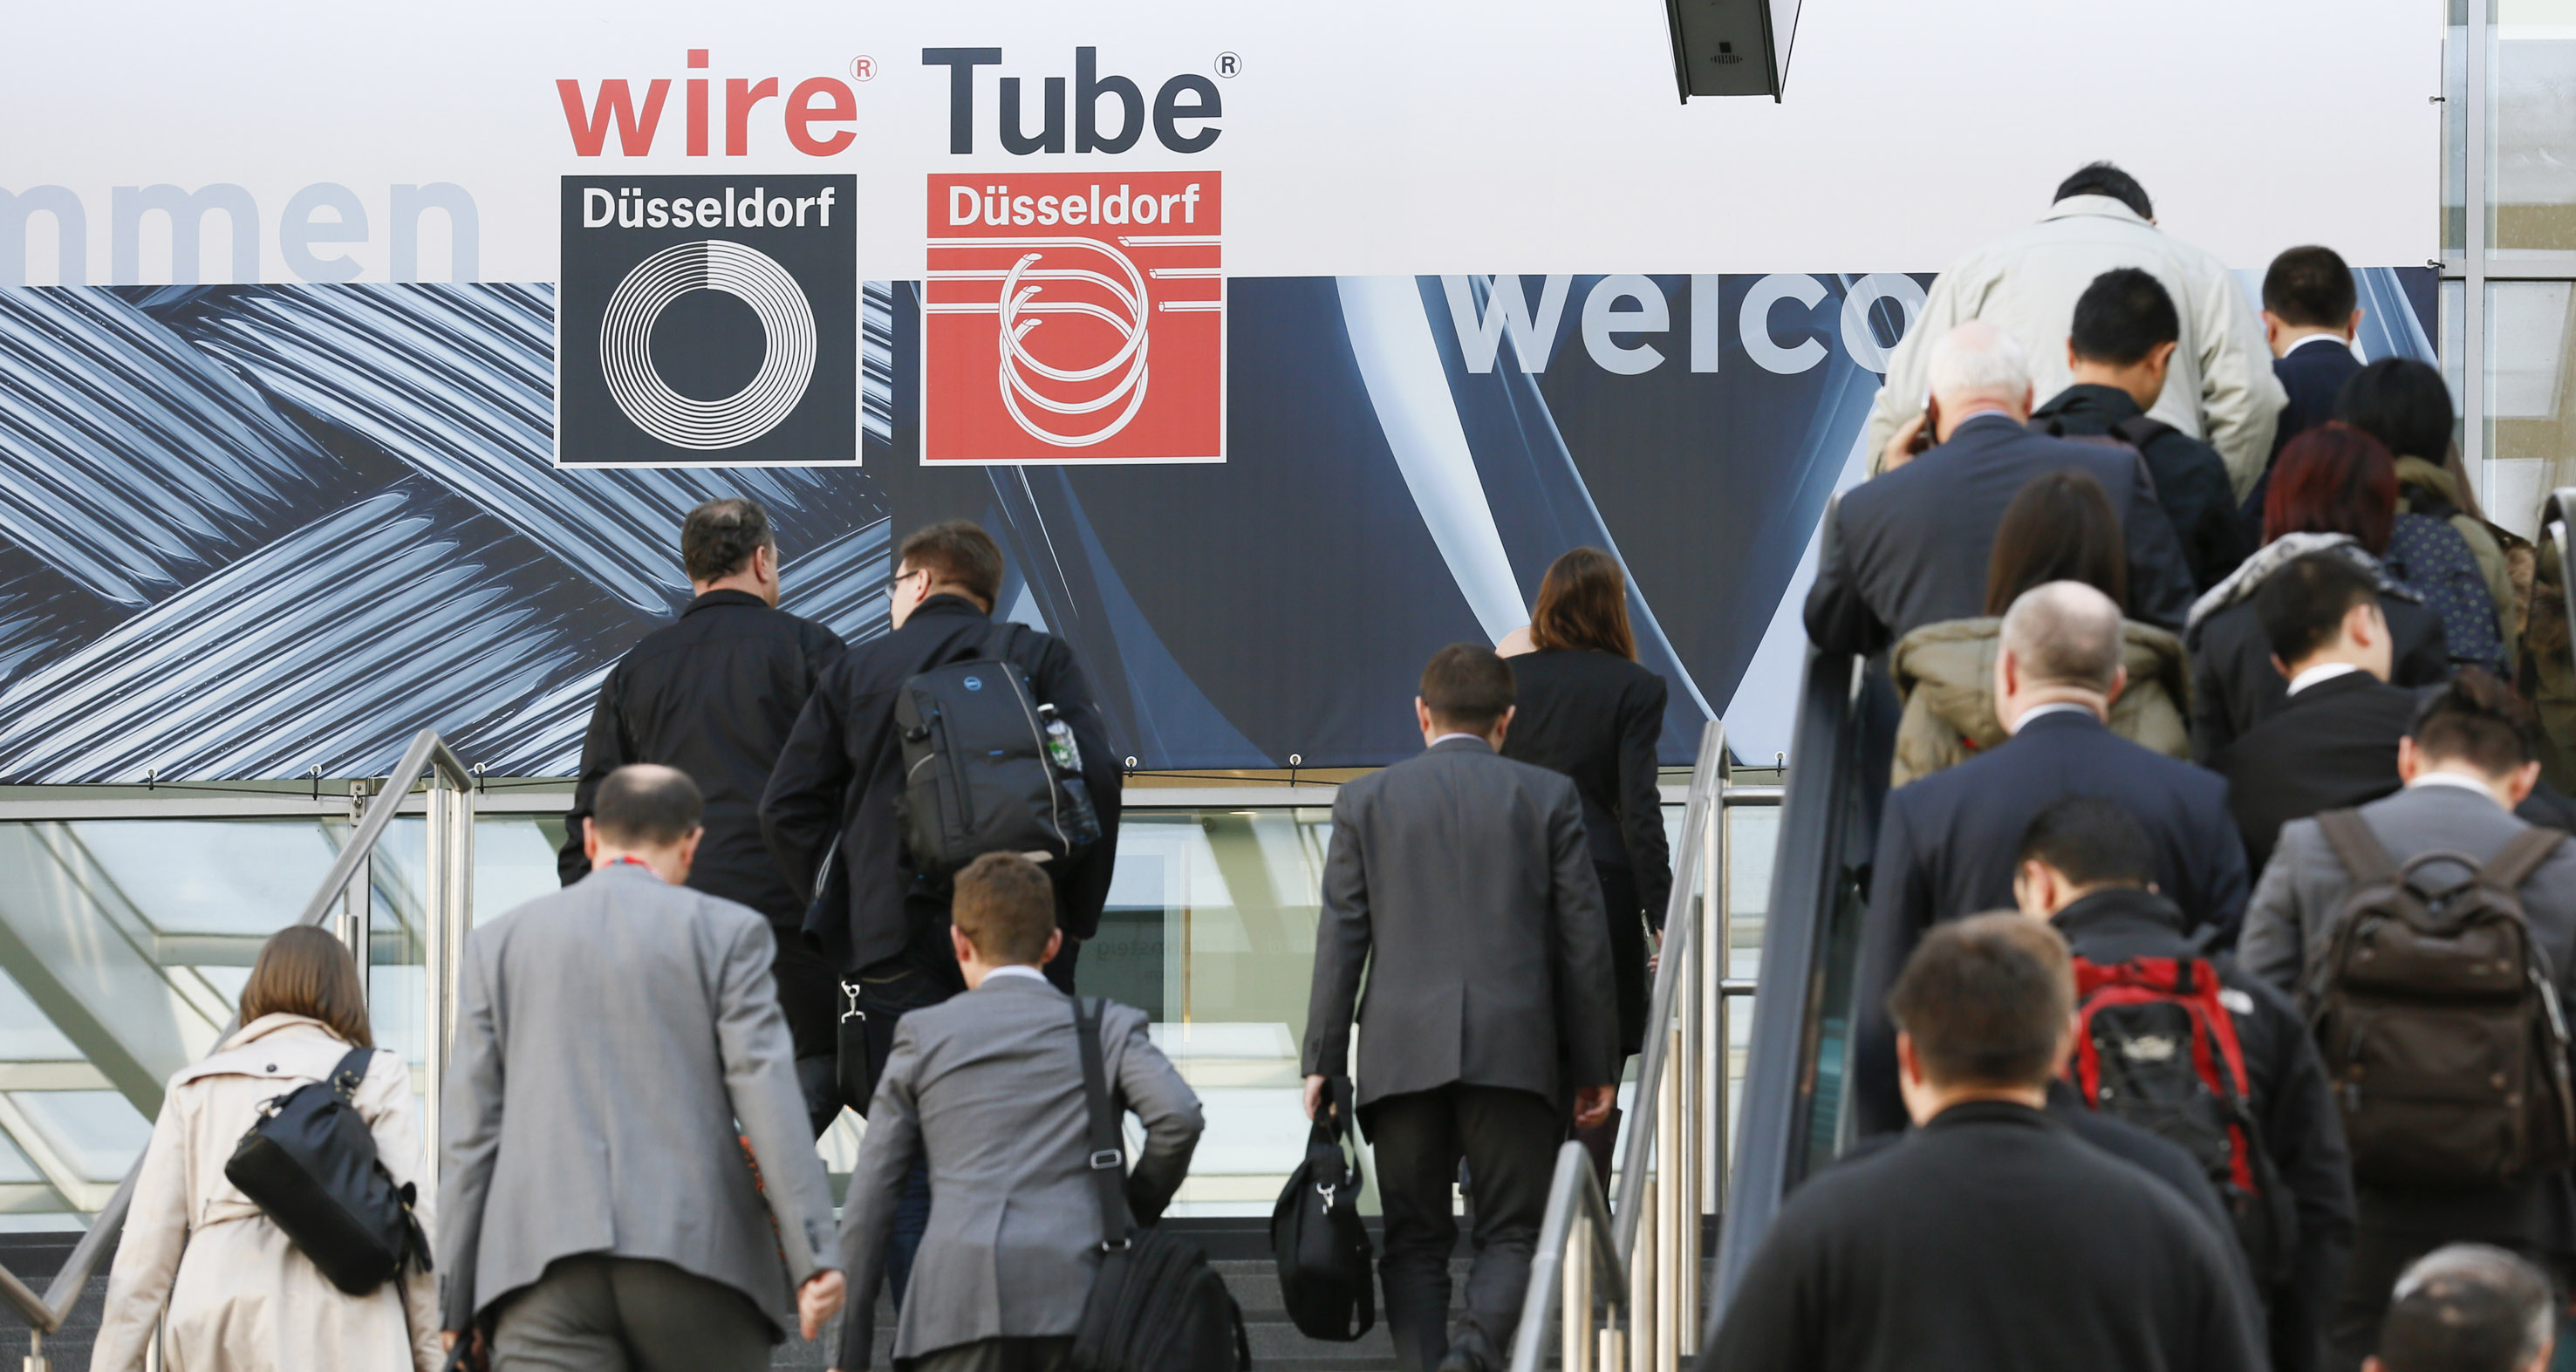 Trade fairs are breaking all records: wire 2018 and Tube 2018 – bigger and more international than ever